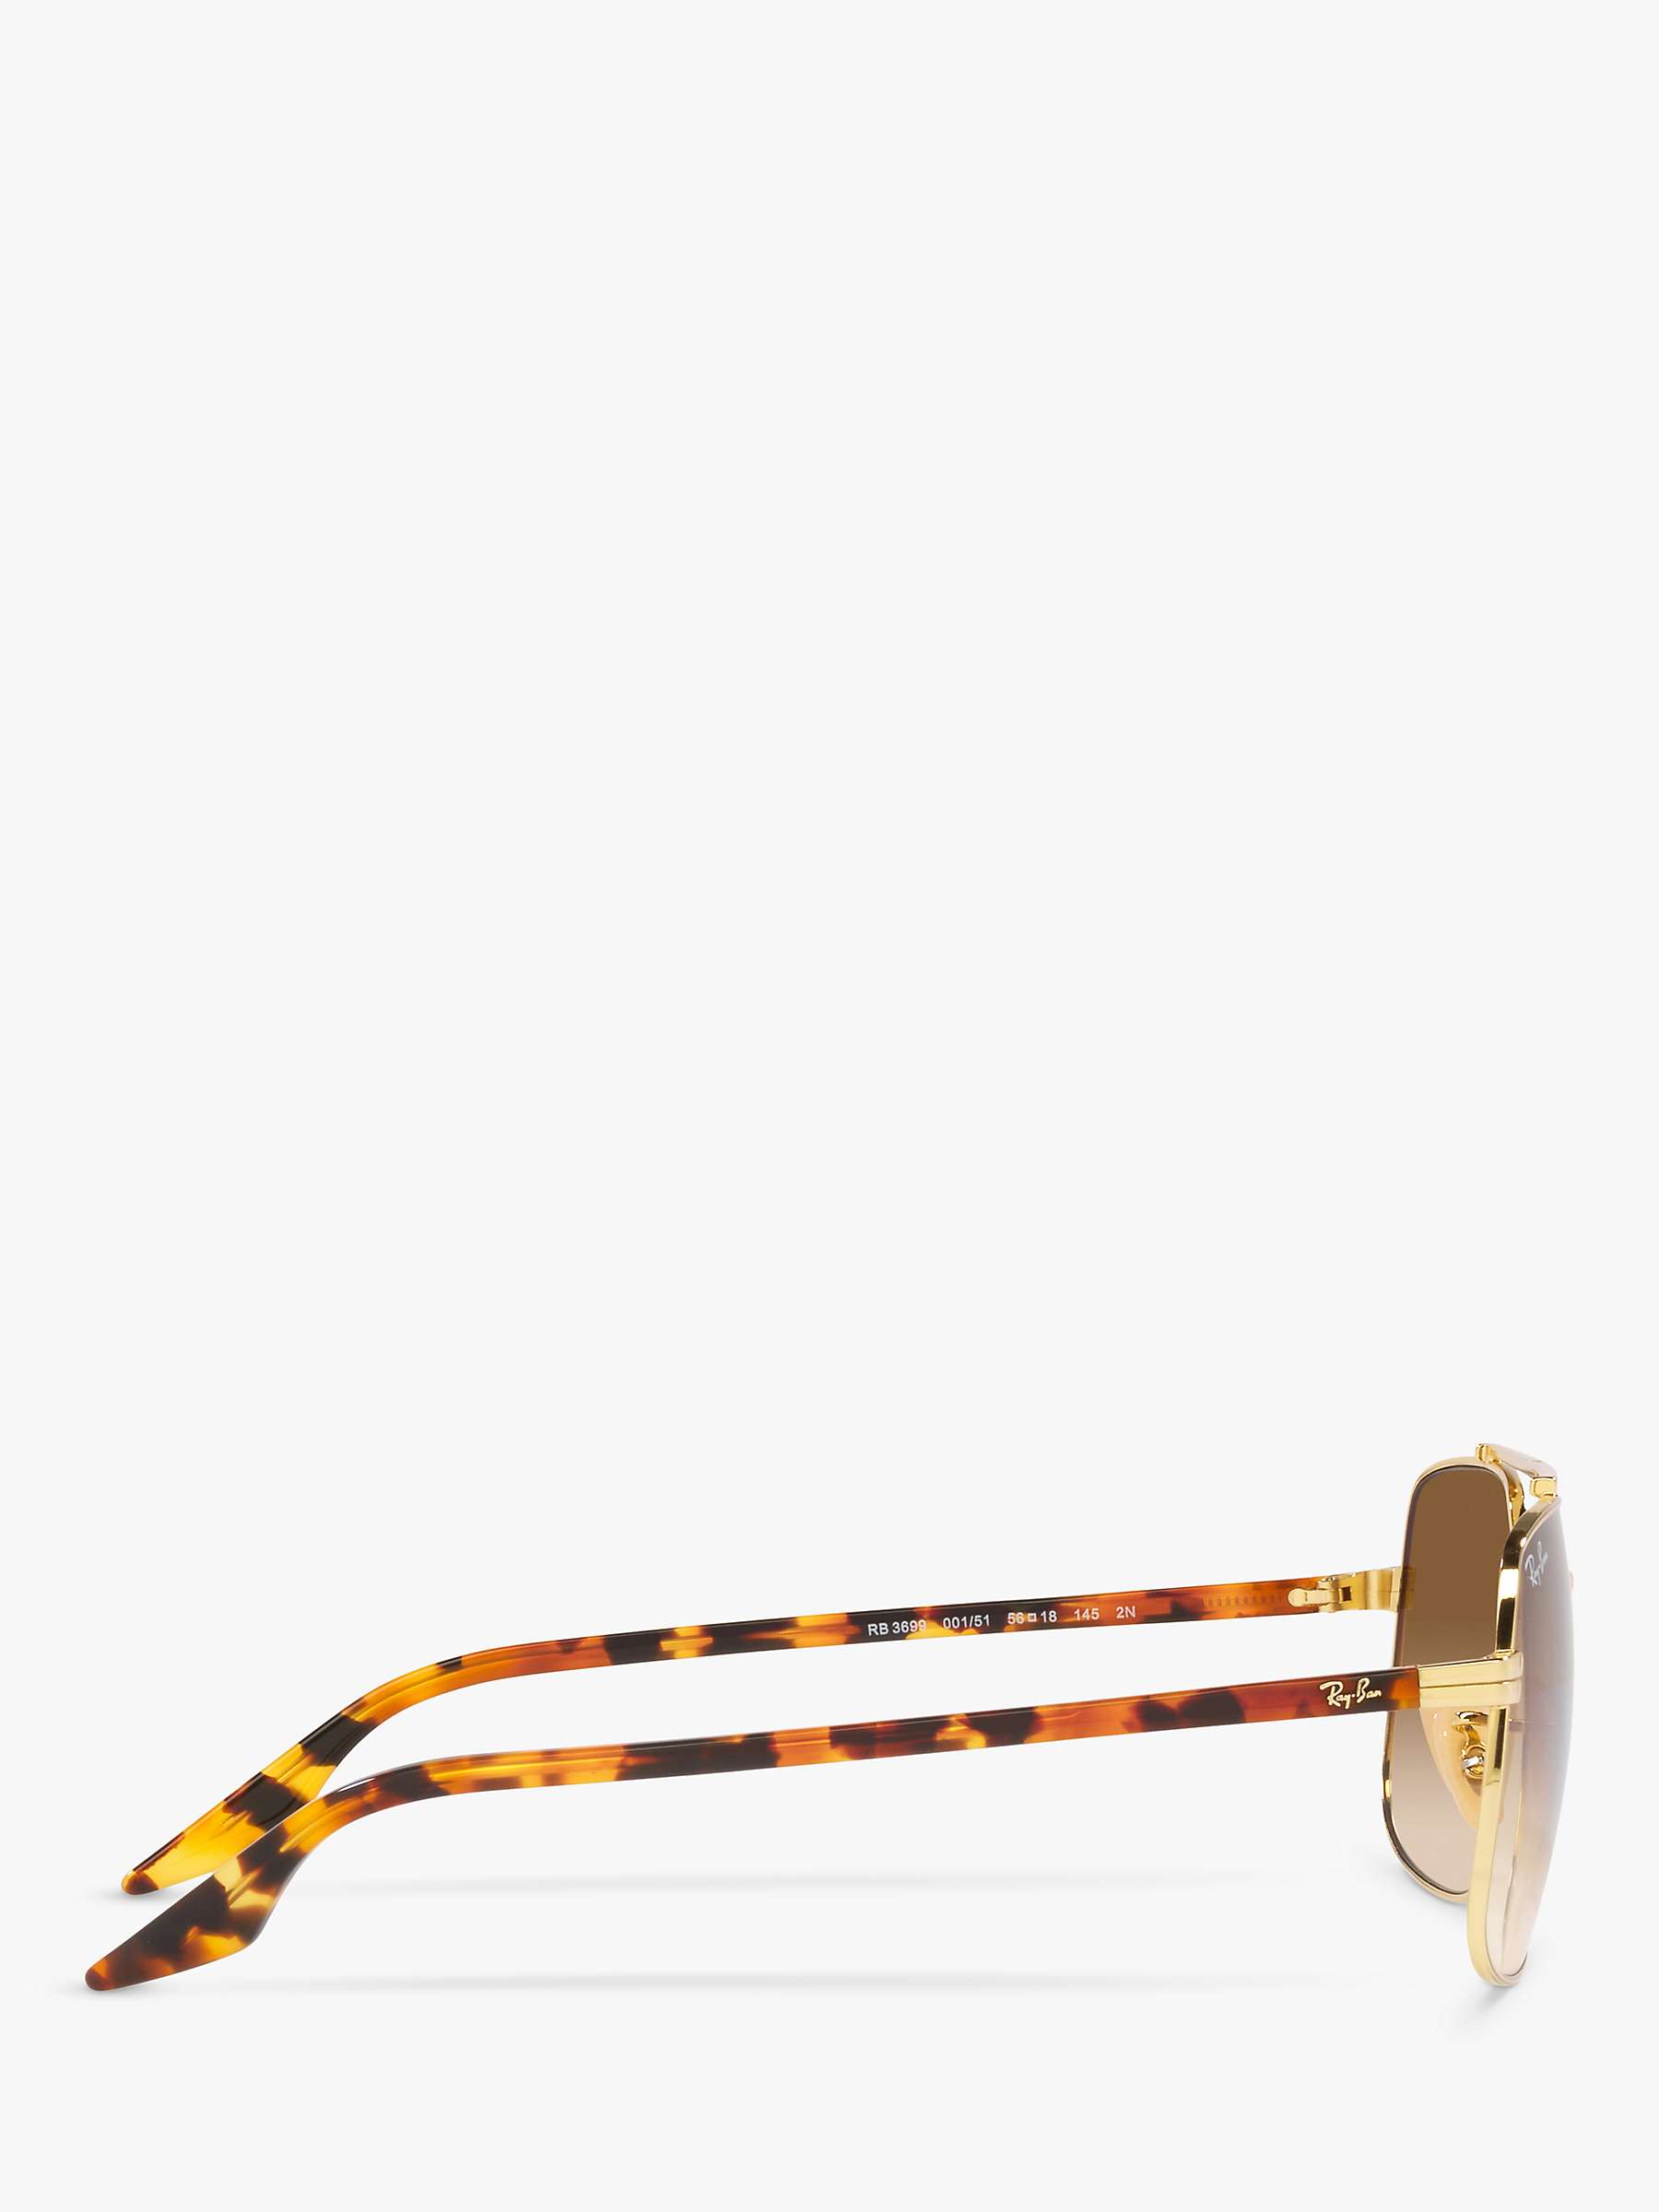 Buy Ray-Ban RB3699 Unisex Square Sunglasses, Arista Gold/Brown Gradient Online at johnlewis.com